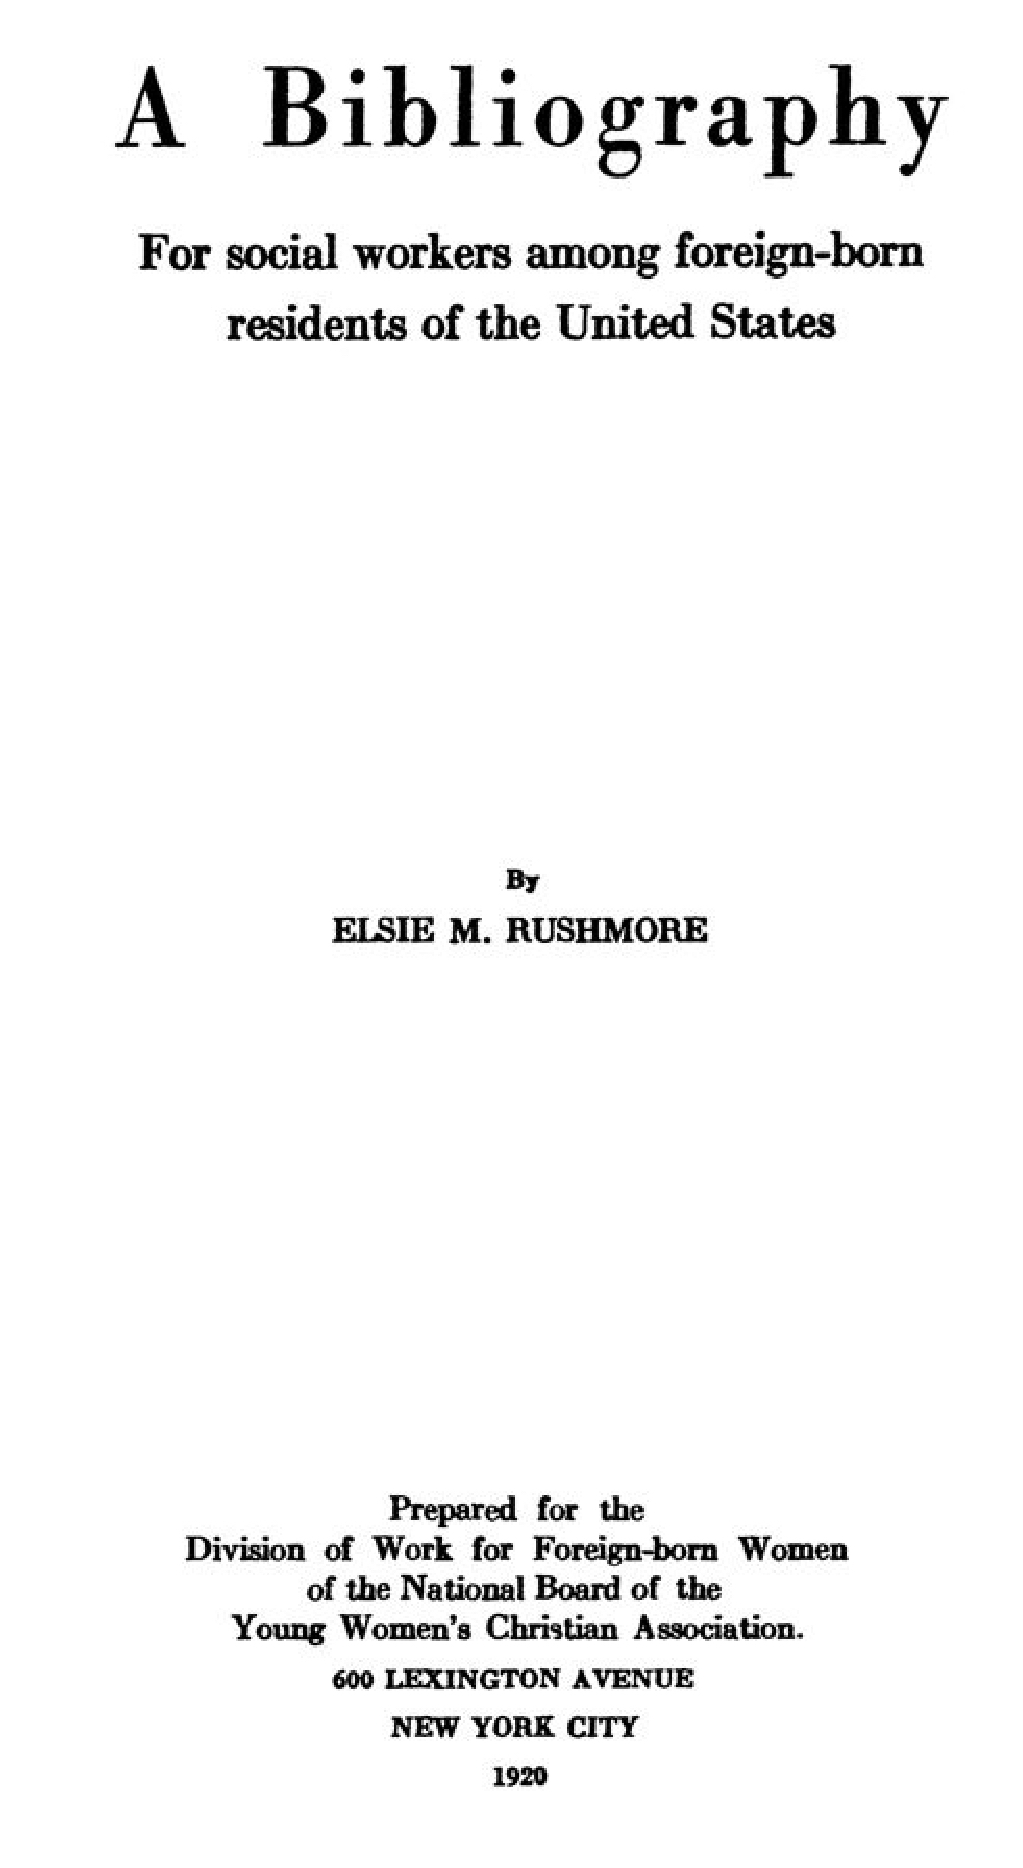 Elsie Mitchell Rushmore, "A Bibliography for Social Workers among Foreign-Born Residents of the United States", New York City, 1920, pp. 34-35.